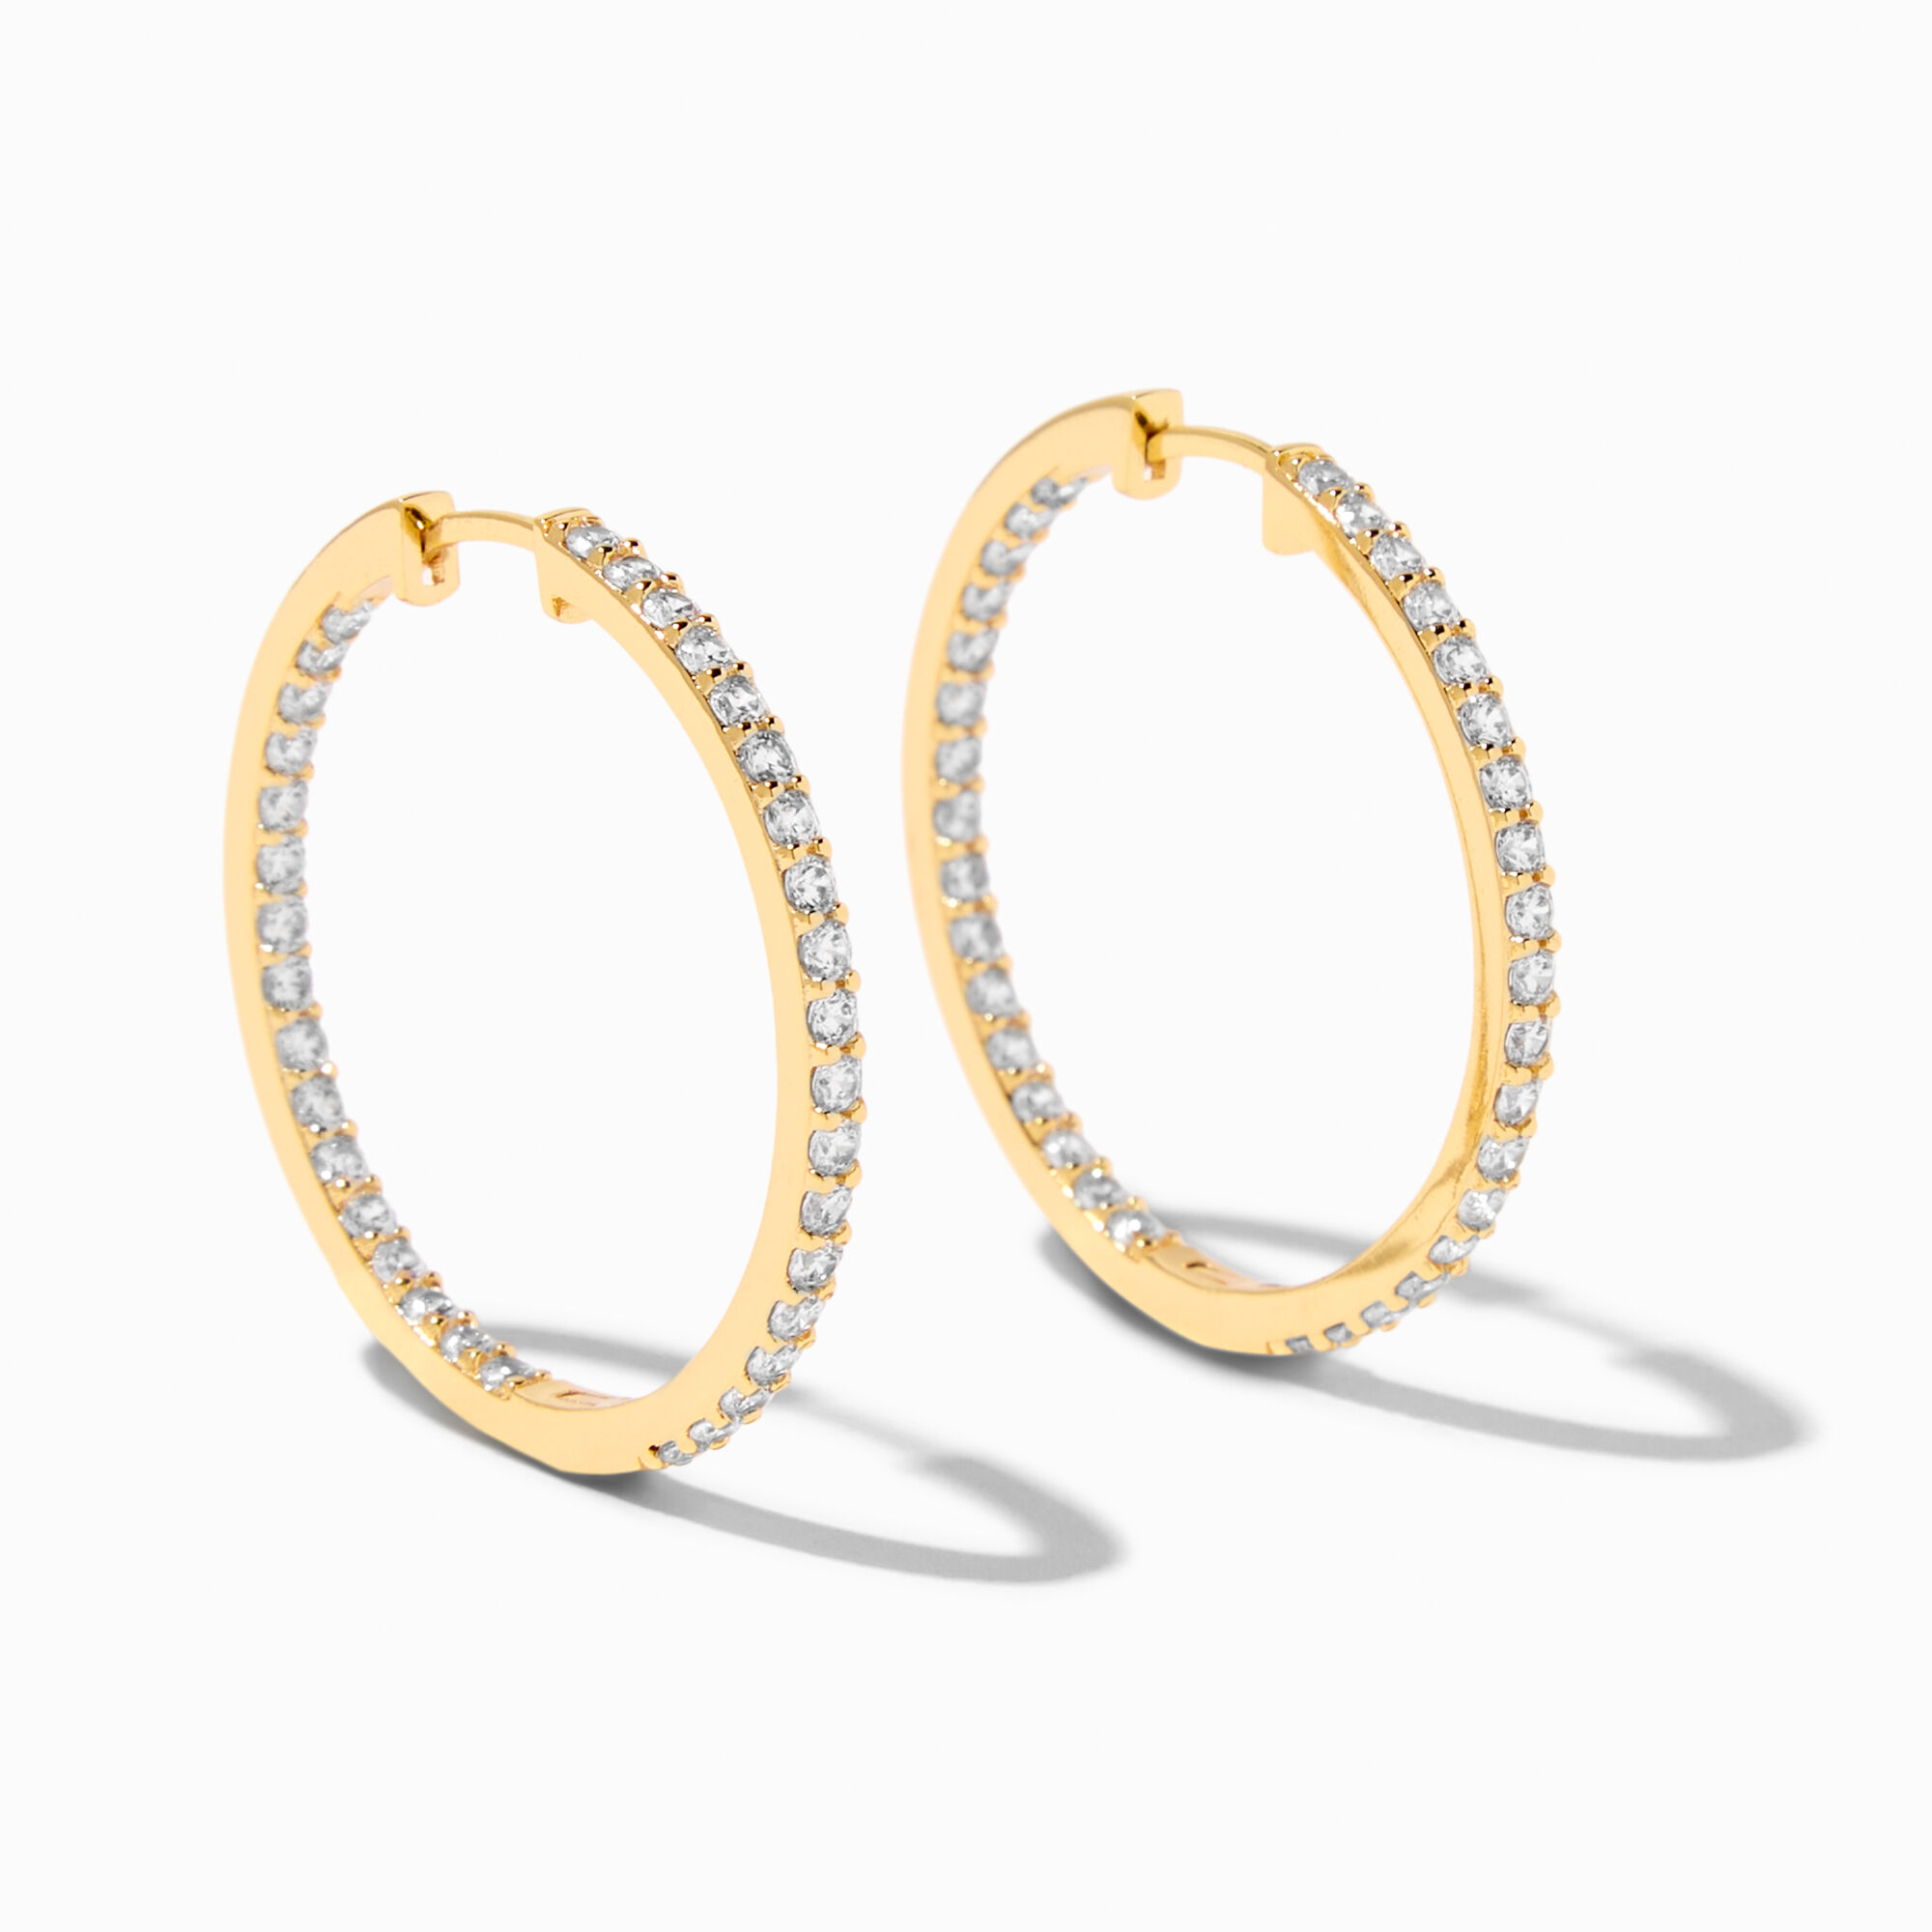 View C Luxe By Claires 18K Gold Plated 30MM Cubic Zirconia Hoop Earrings Yellow information